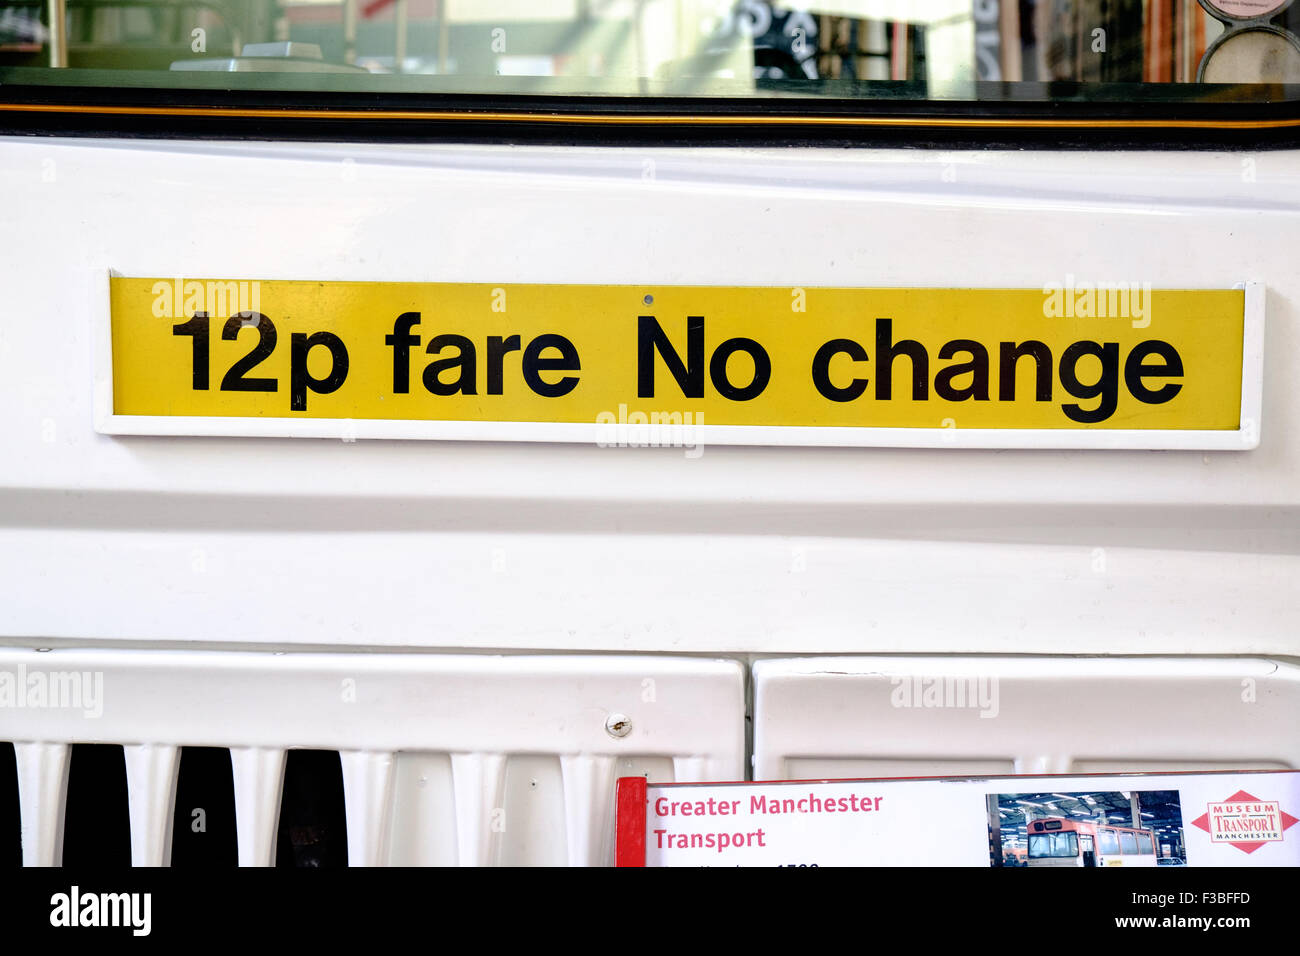 Sign saying '12p fare No change' on bus at Museum of Transport, Manchester, UK Stock Photo